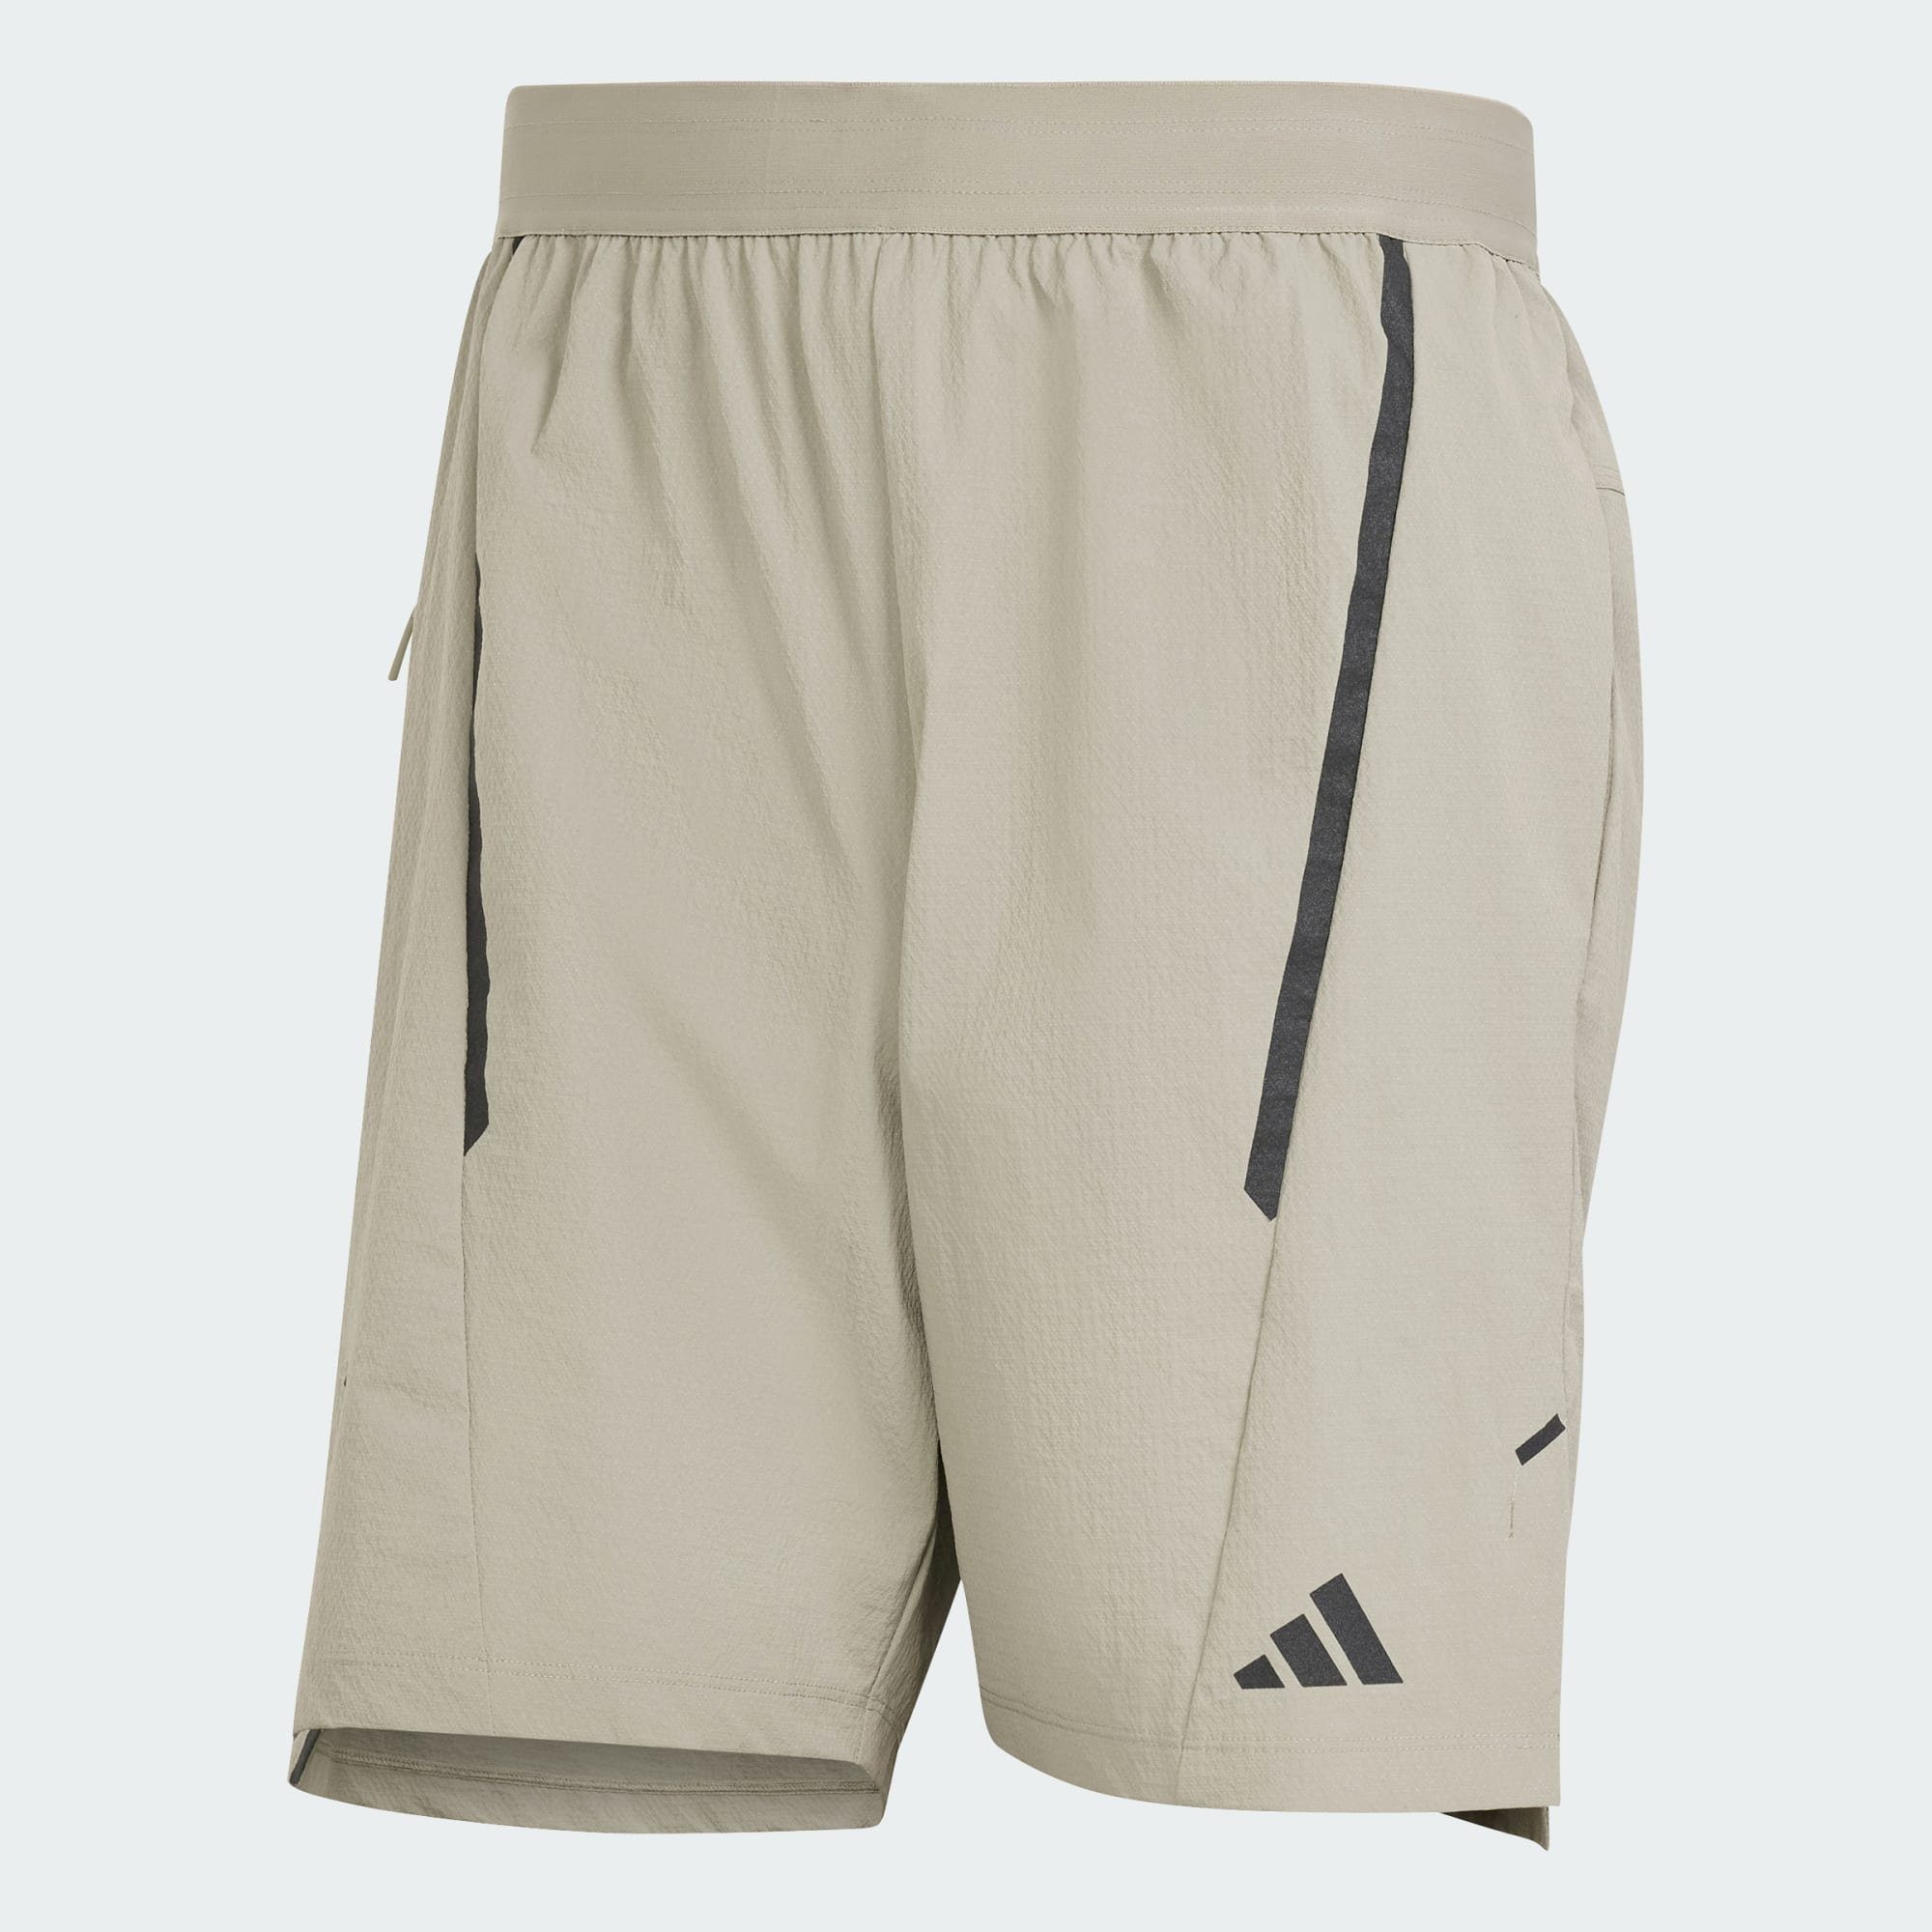 adidas Performance Funktionsshorts DESIGNED Black Silver WORKOUT / SHORTS Pebble FOR ADISTRONG TRAINING